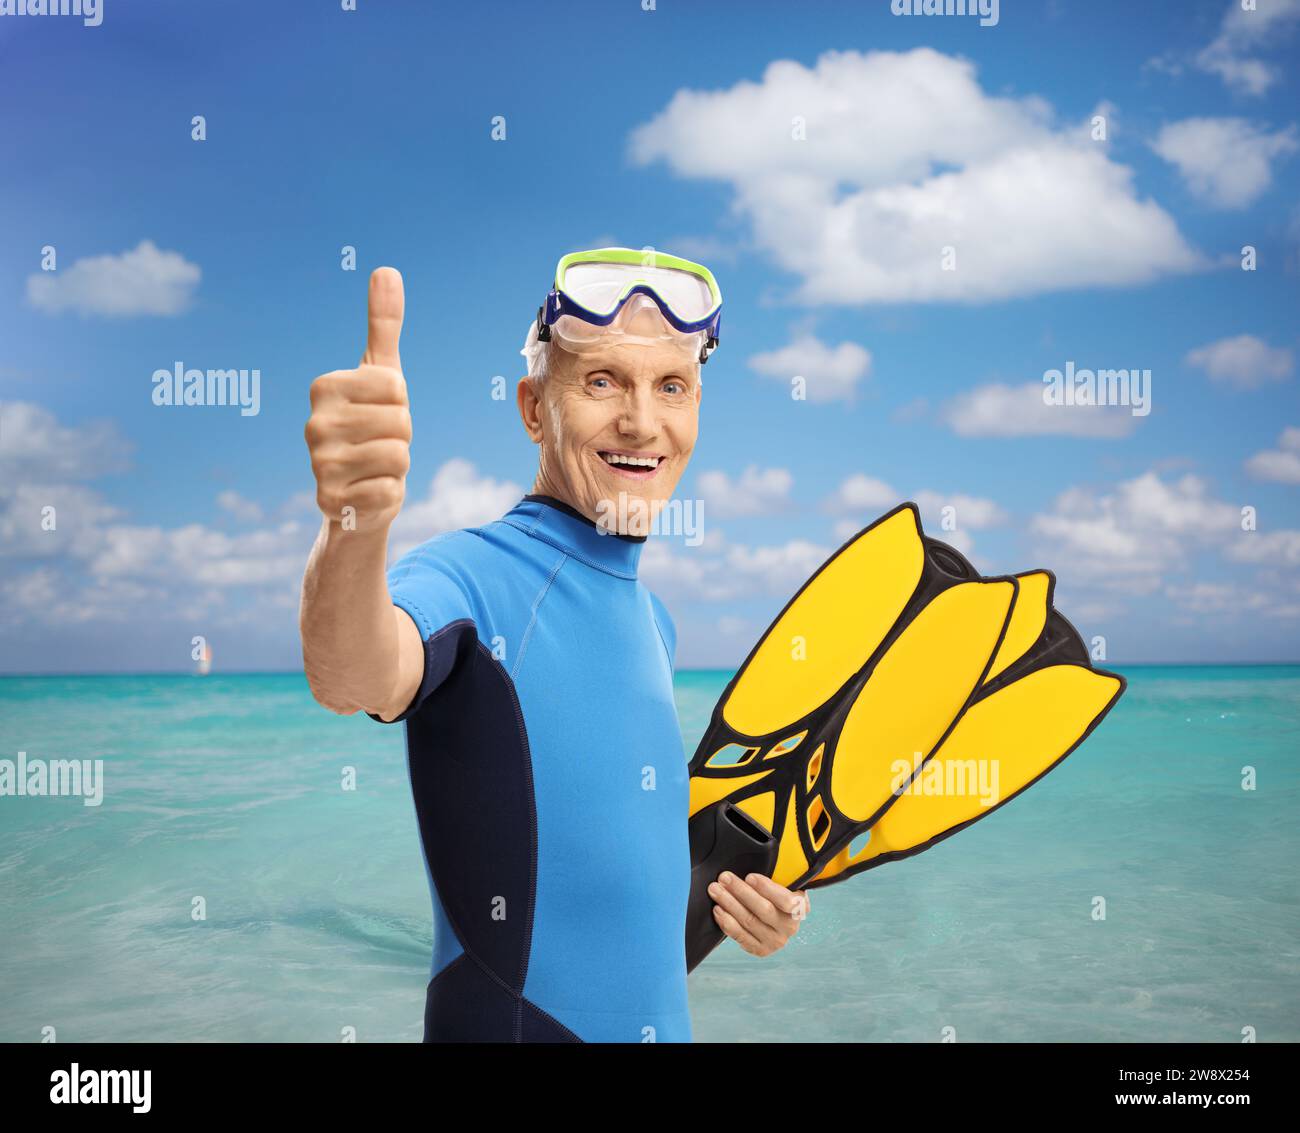 Senior man with snorkeling equipment making a thumb up sign by the sea Stock Photo